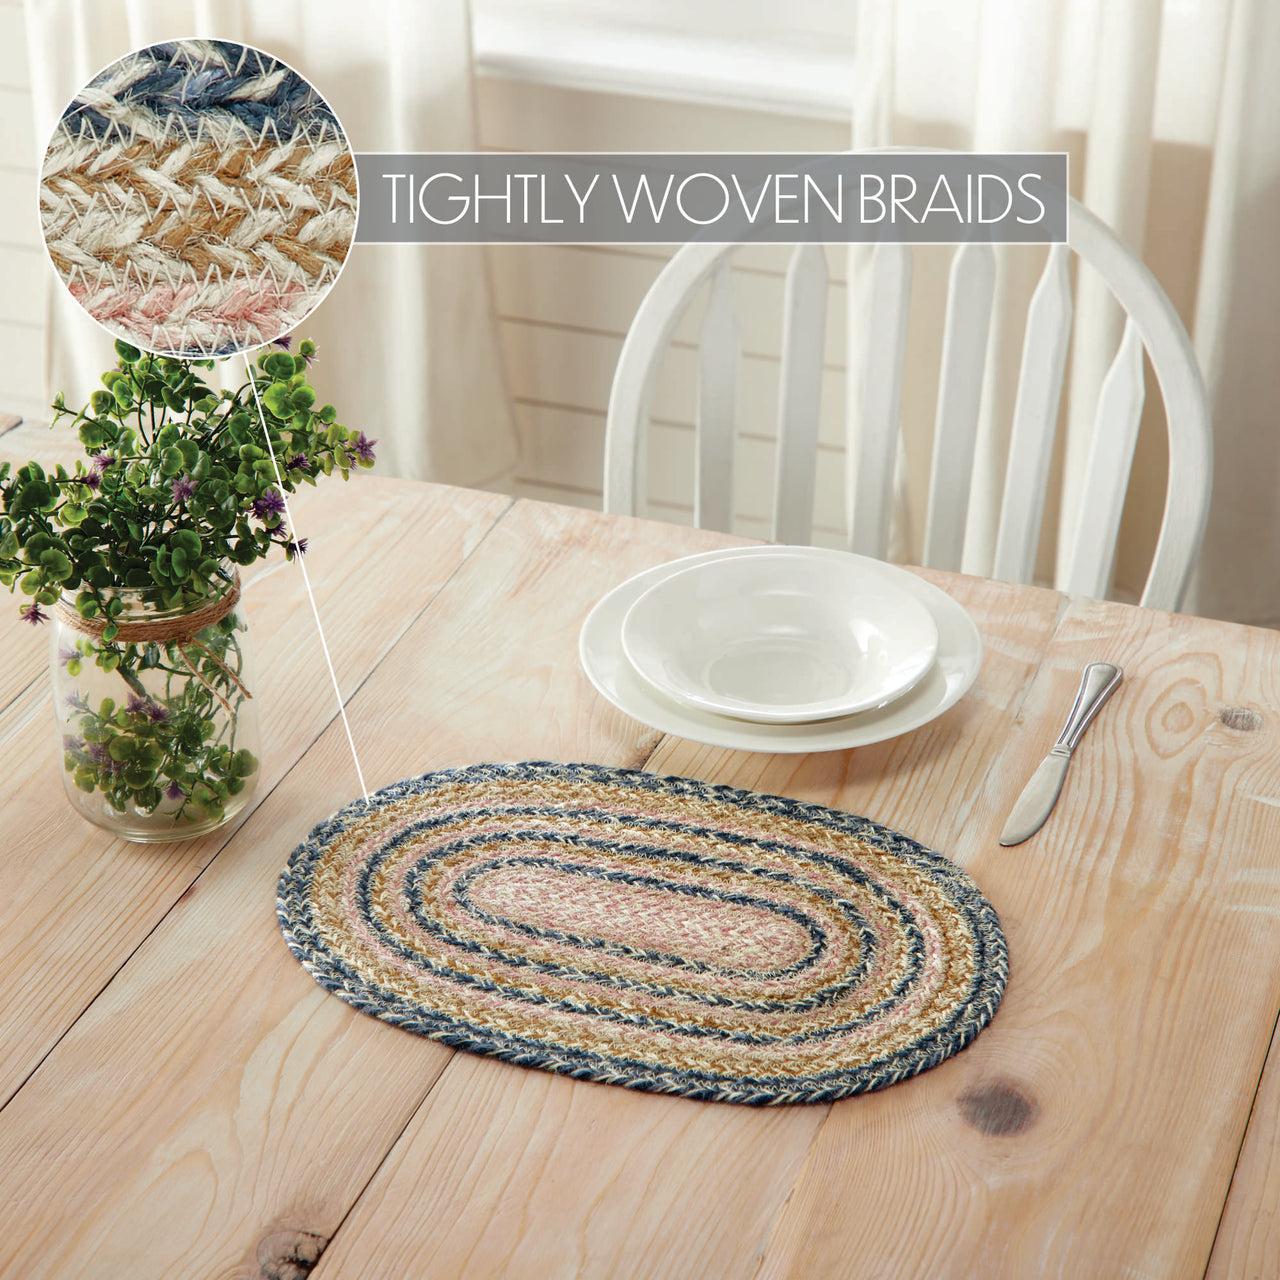 Kaila Jute Braided Oval Placemat 10"x15" VHC Brands